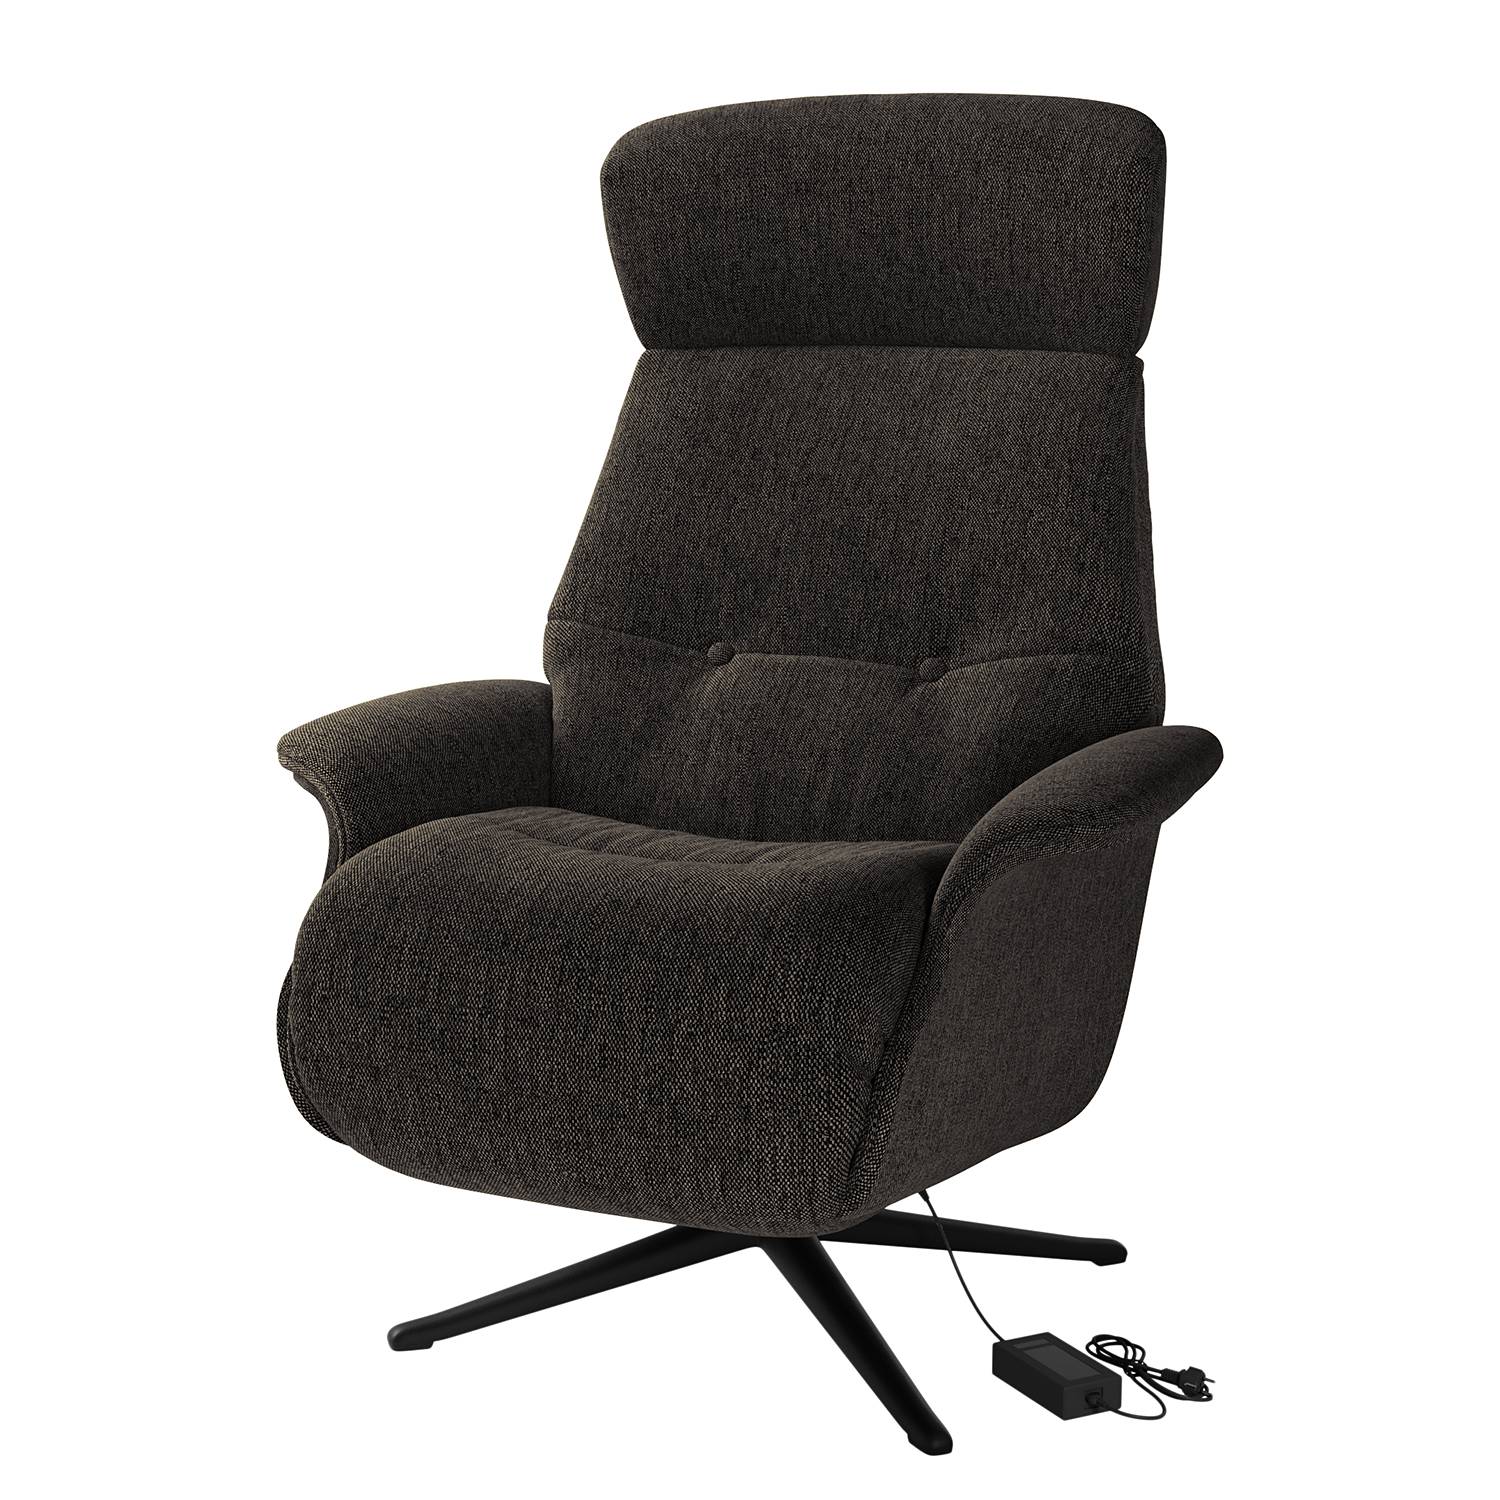 Image of Fauteuil relax Anderson III 000000001000131457